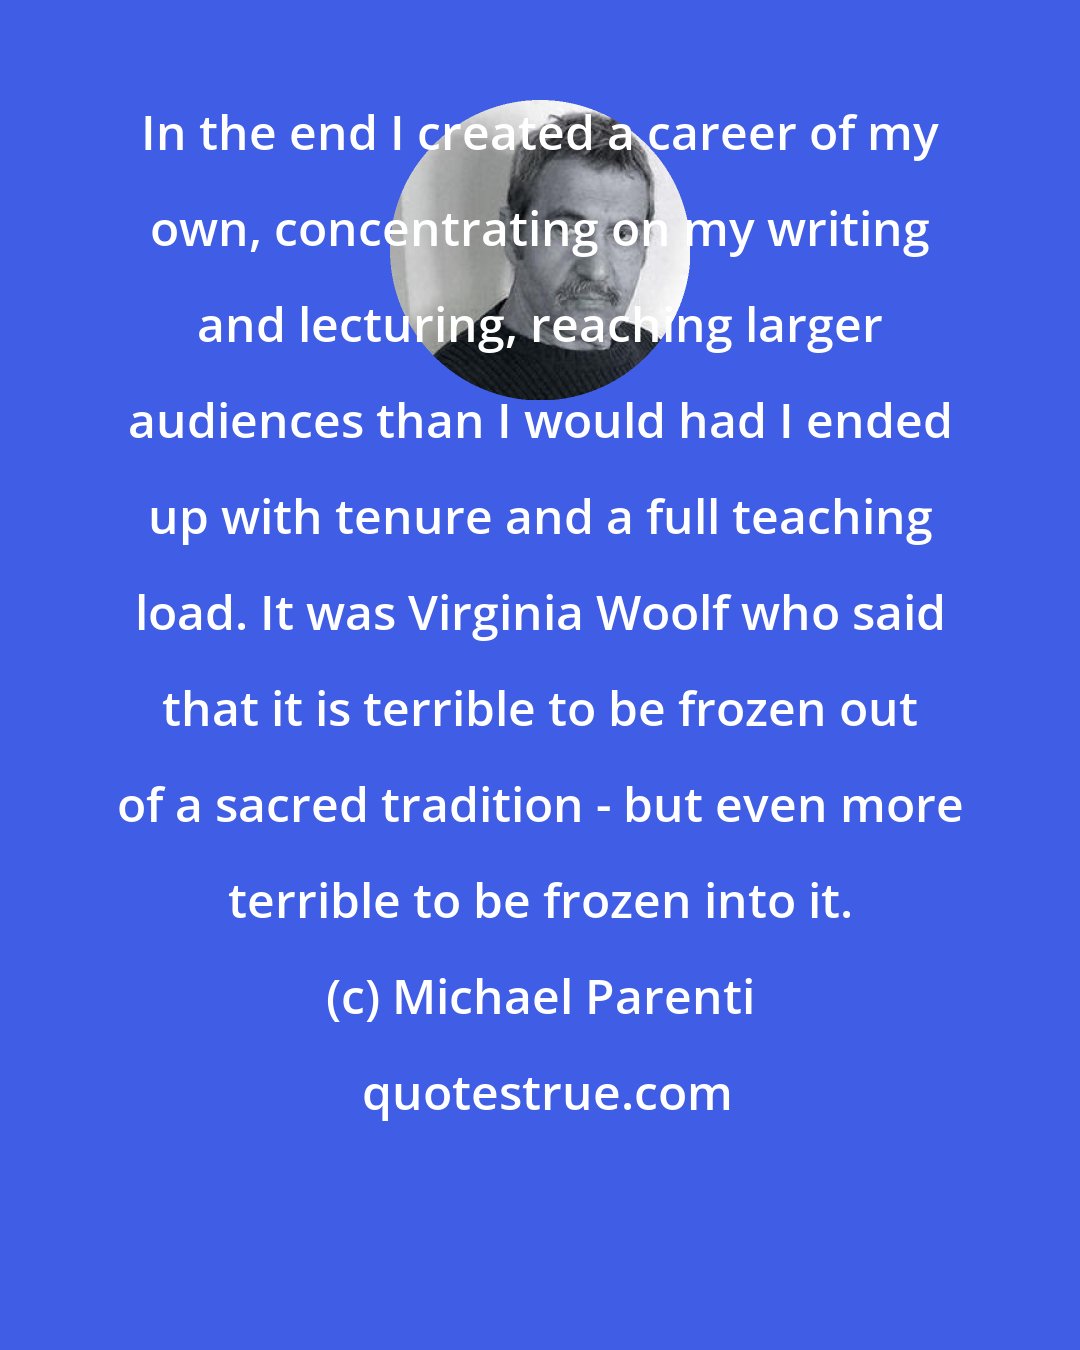 Michael Parenti: In the end I created a career of my own, concentrating on my writing and lecturing, reaching larger audiences than I would had I ended up with tenure and a full teaching load. It was Virginia Woolf who said that it is terrible to be frozen out of a sacred tradition - but even more terrible to be frozen into it.